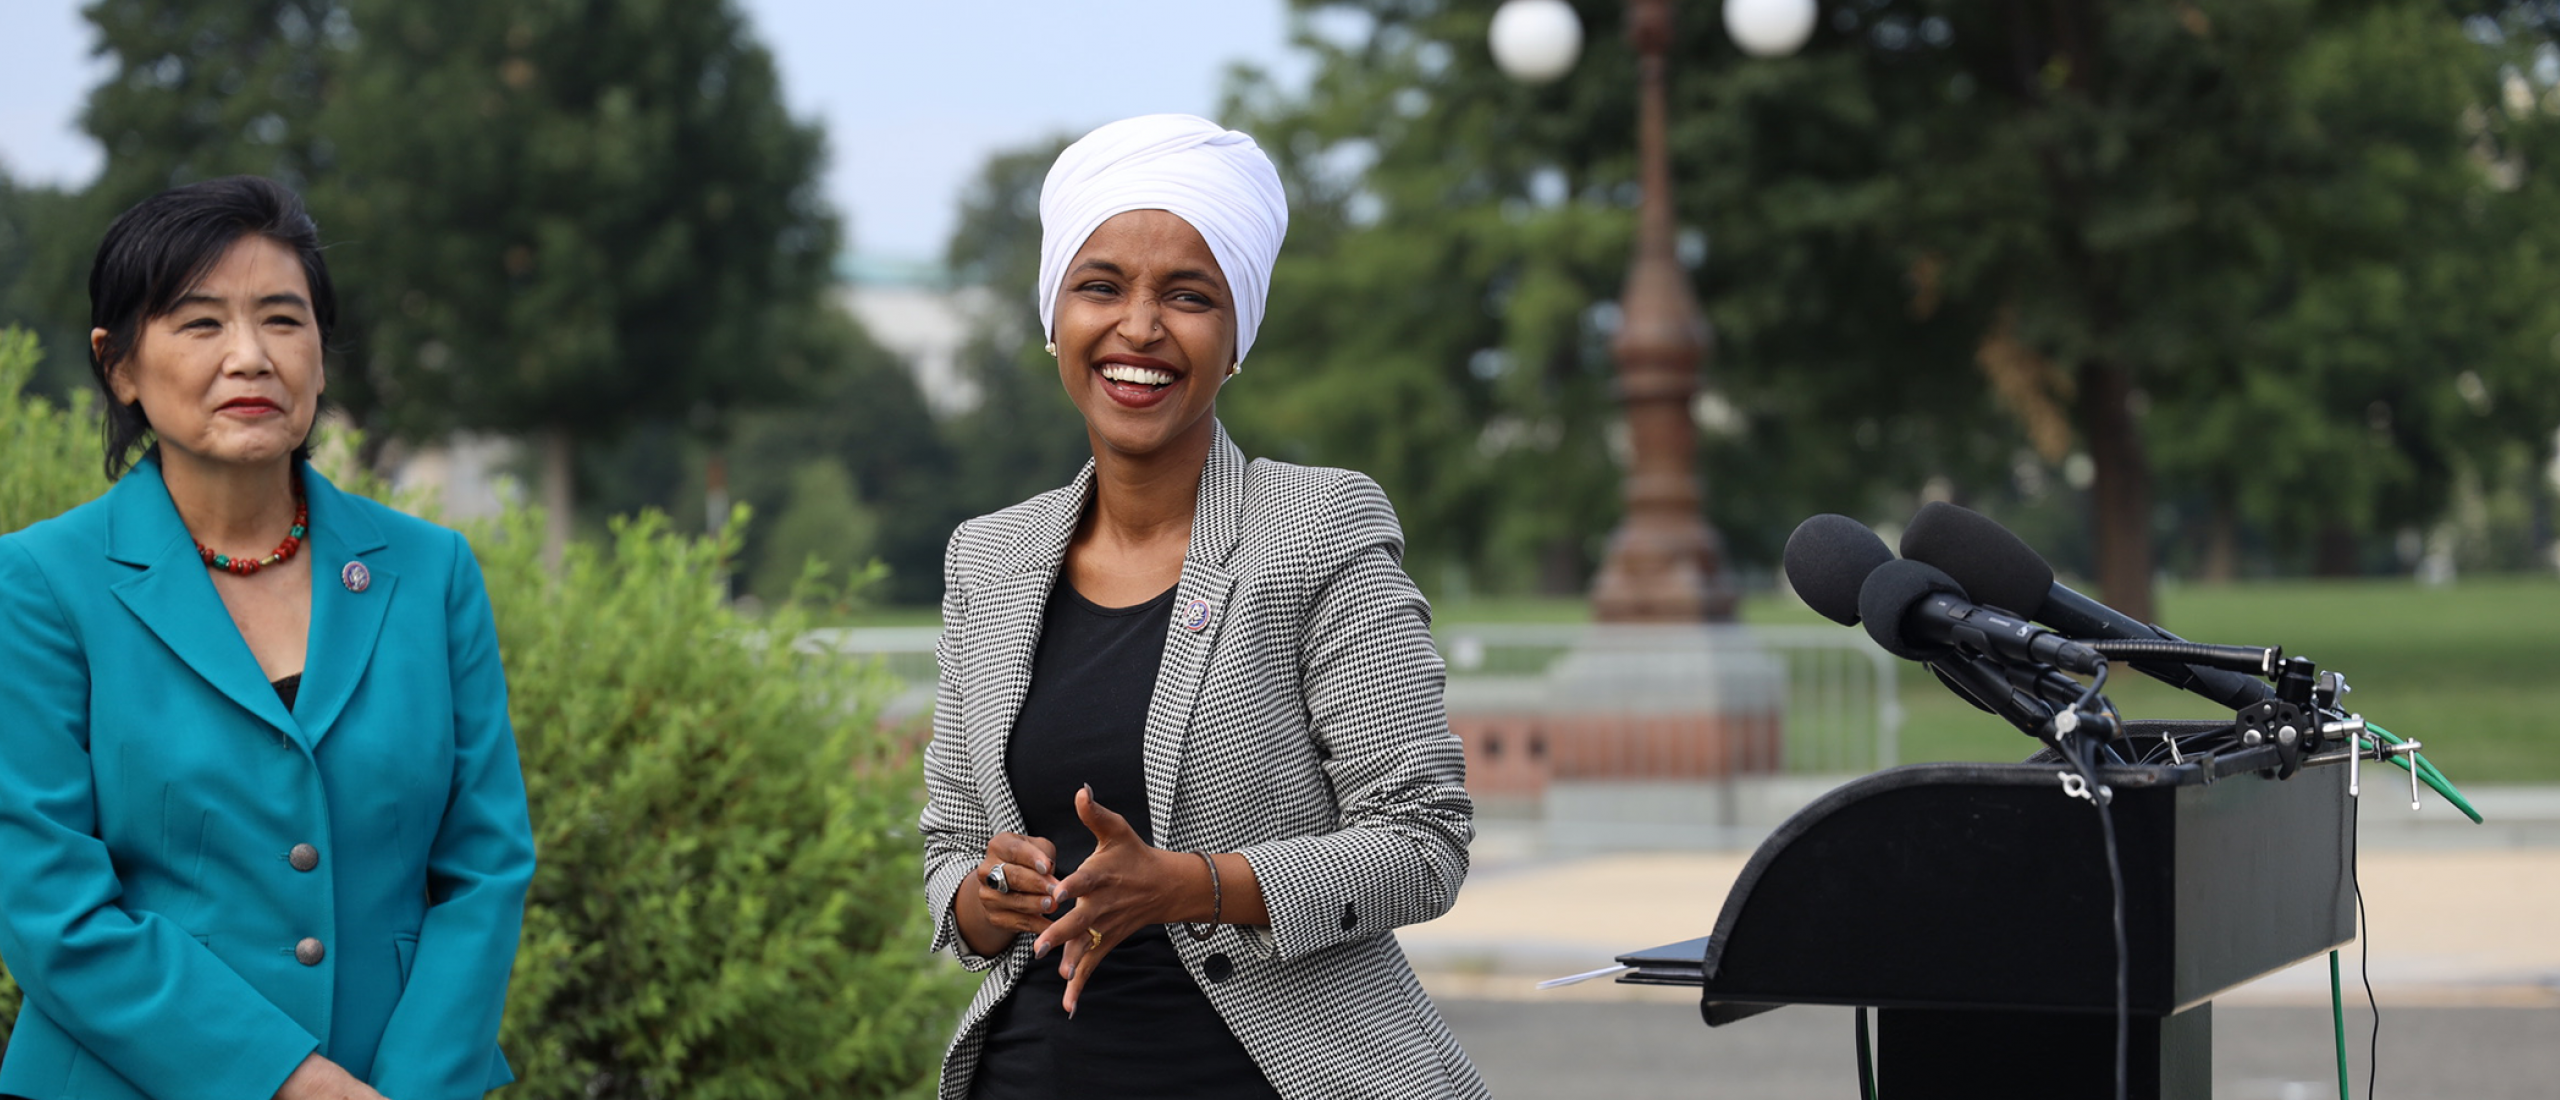 Rep. Omar Passes 9 amendments in House minibus package